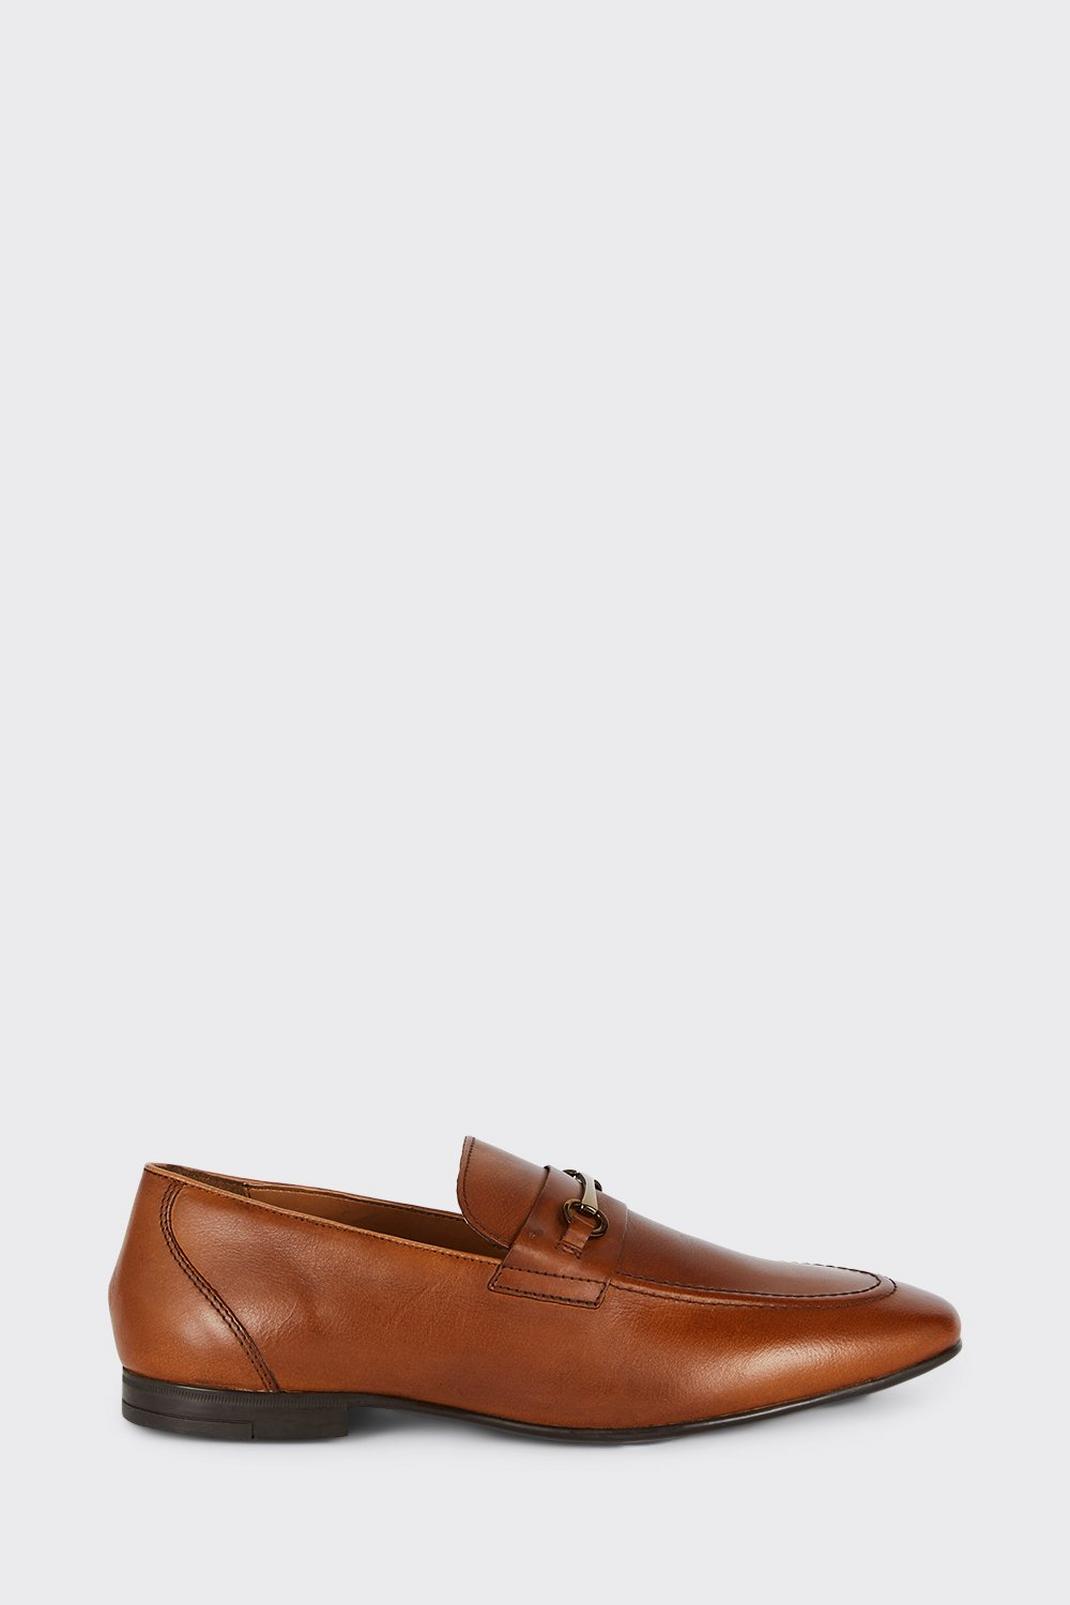 Tan Leather Gold Buckle Slip On Loafers image number 1